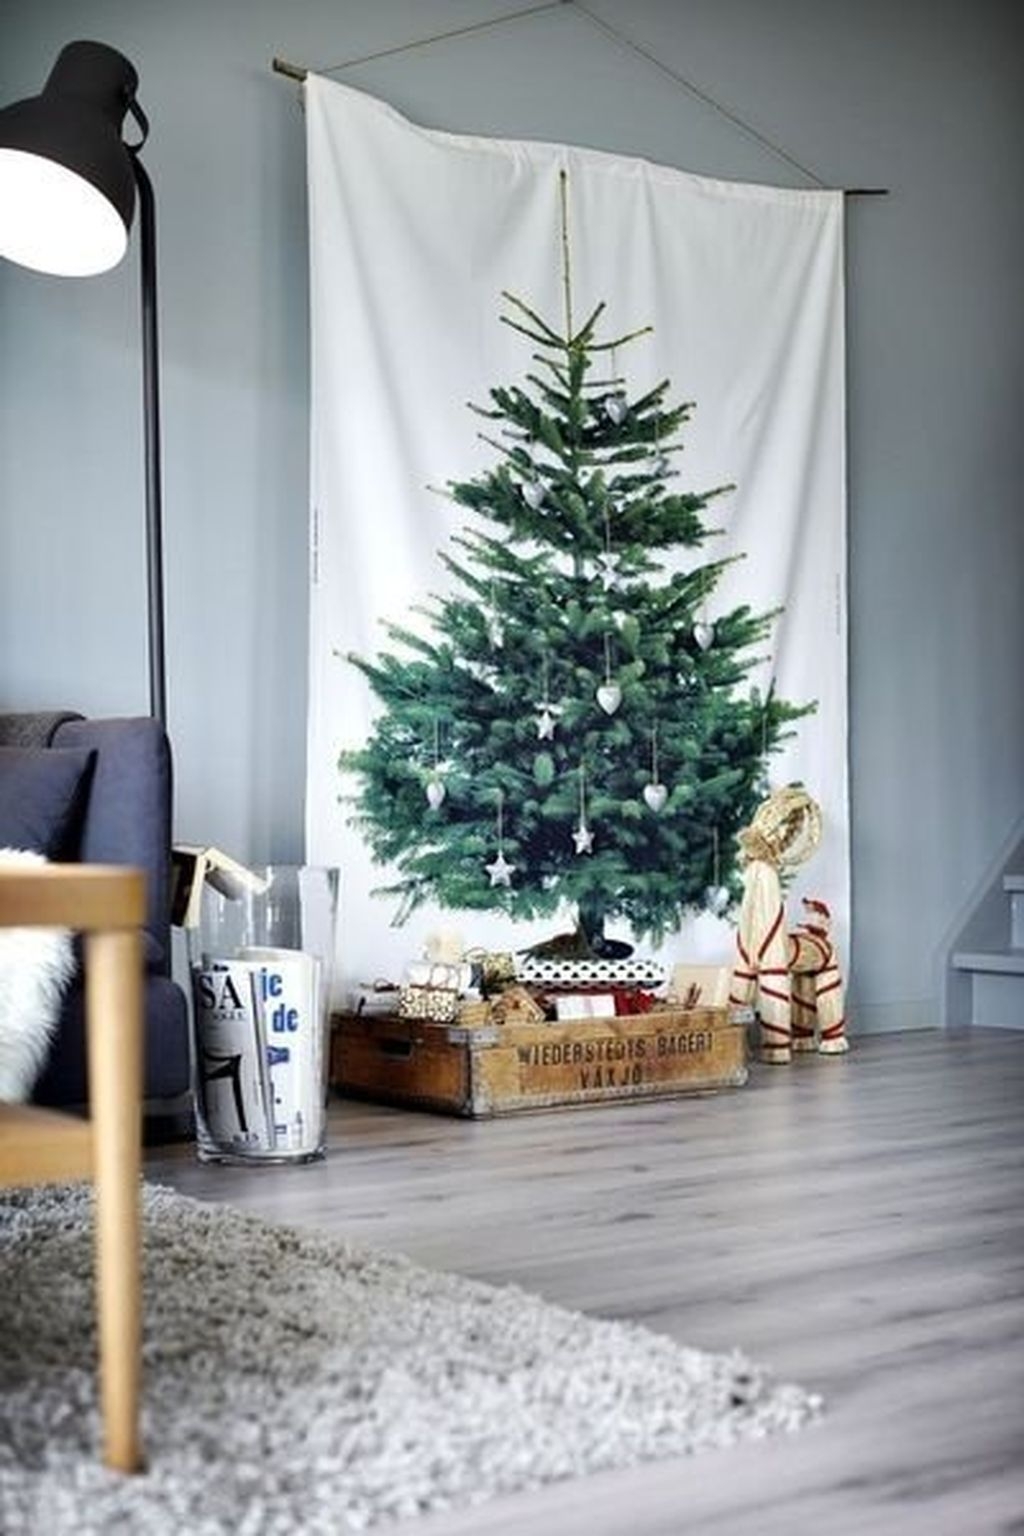 Inspiring Home Decoration Ideas With Small Christmas Tree 31